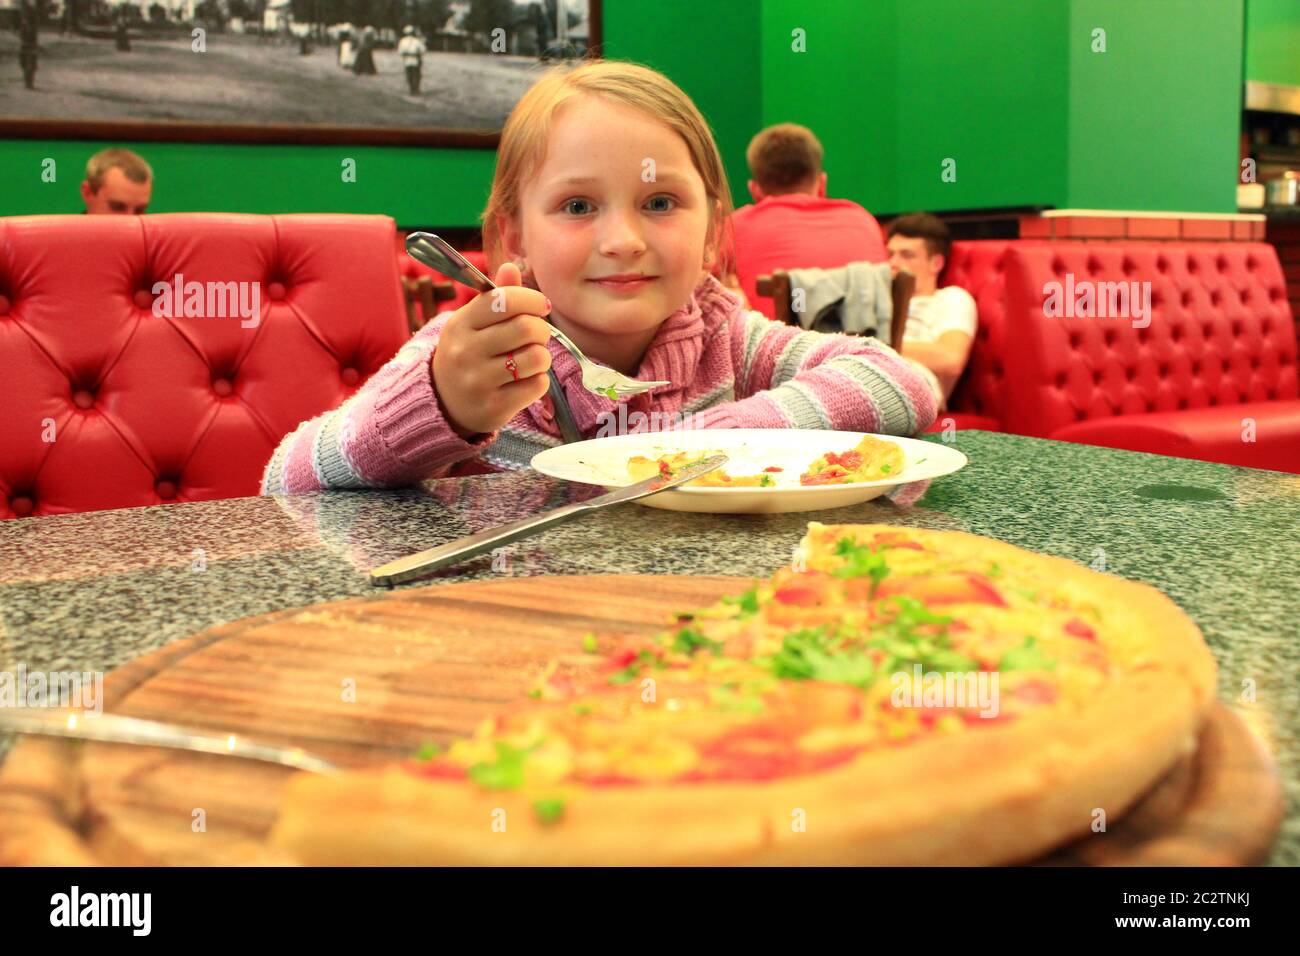 Little girl eating pizza in pizzeria. Big pizza and girl. Delicious fast food meal Stock Photo